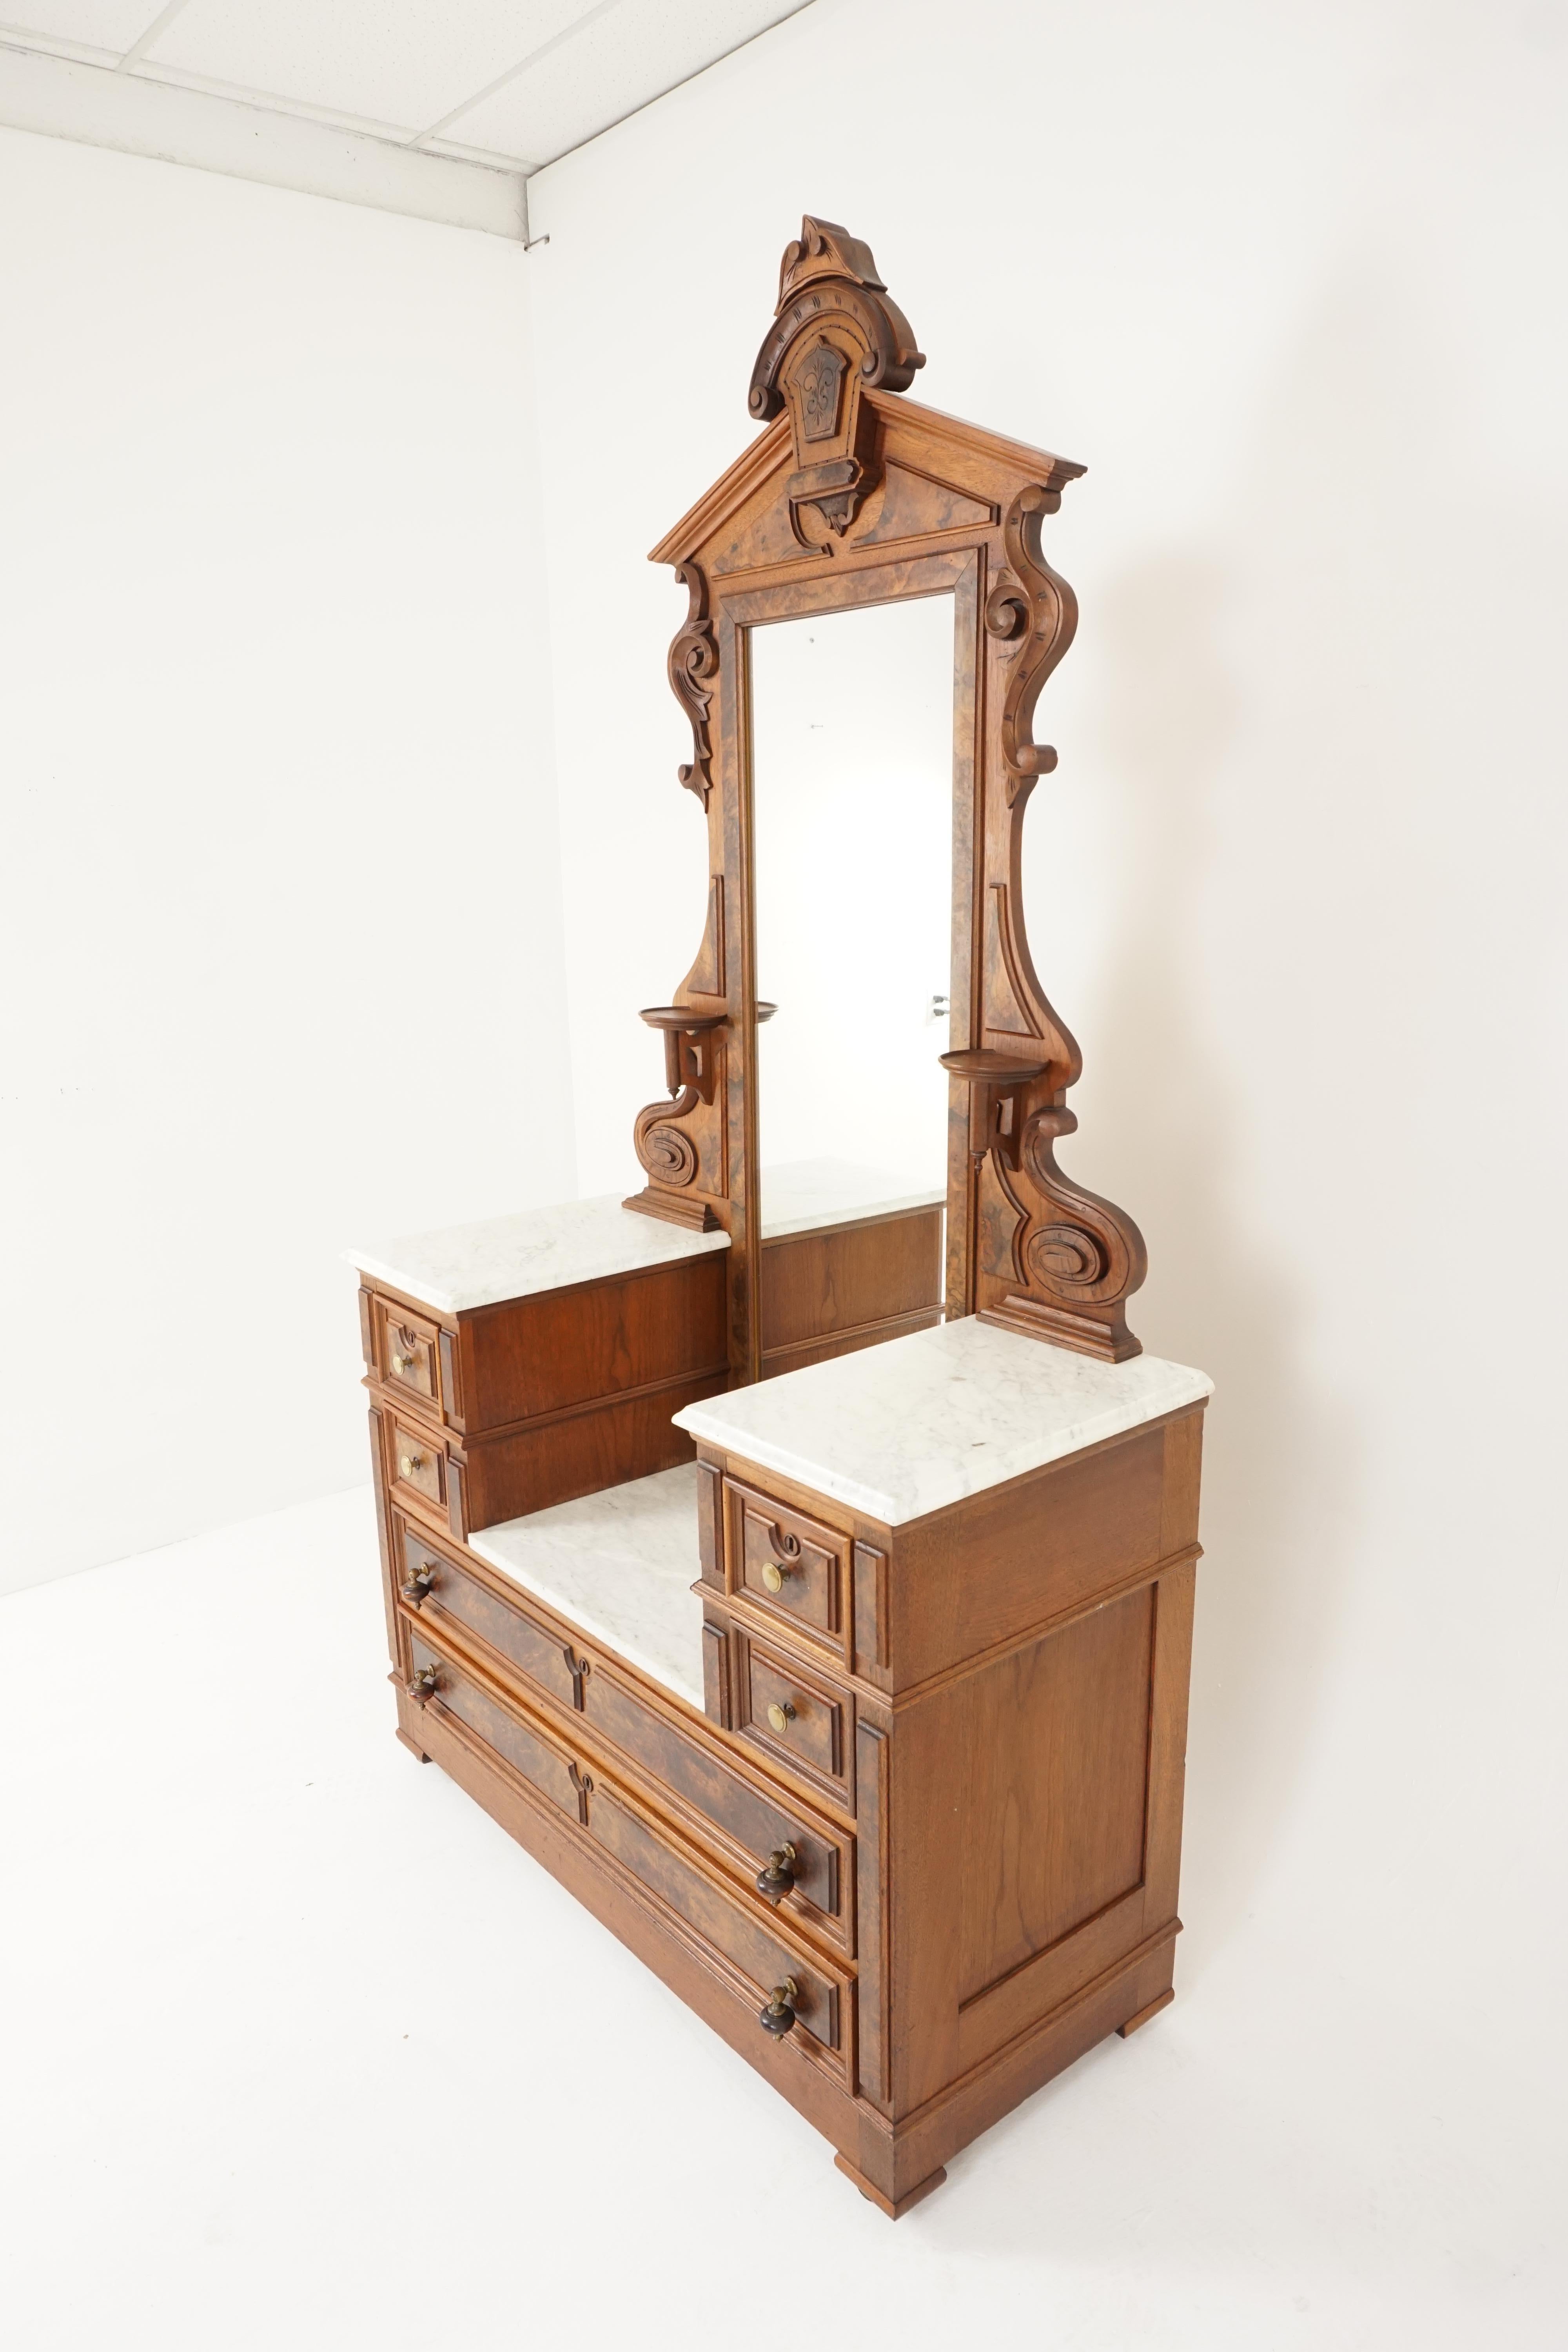 Antique Victorian walnut dresser, marble top, East Lake, American 1880, H199

American 1880
Solid walnut + burr walnut veneer
Original finish
Carved pediment on top
Framed mirror flanked by a pair of round candlestick holders
White marble sits on